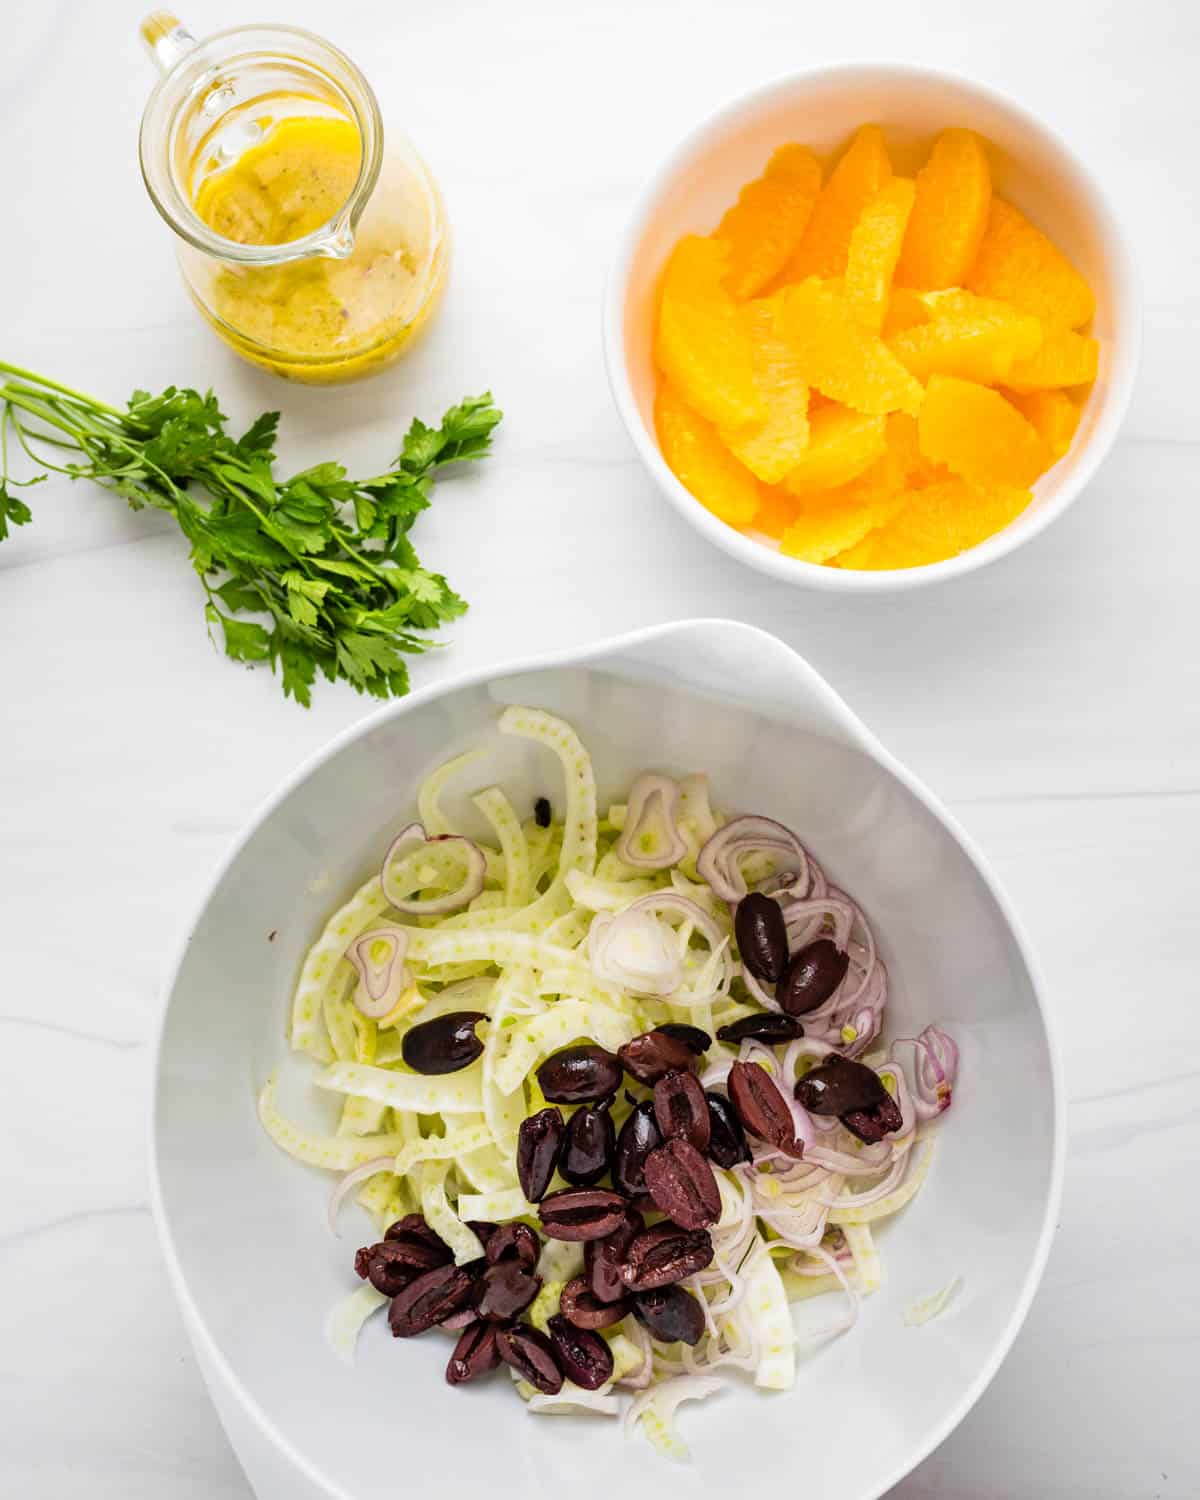 Assembling the citrus salad in a bowl.